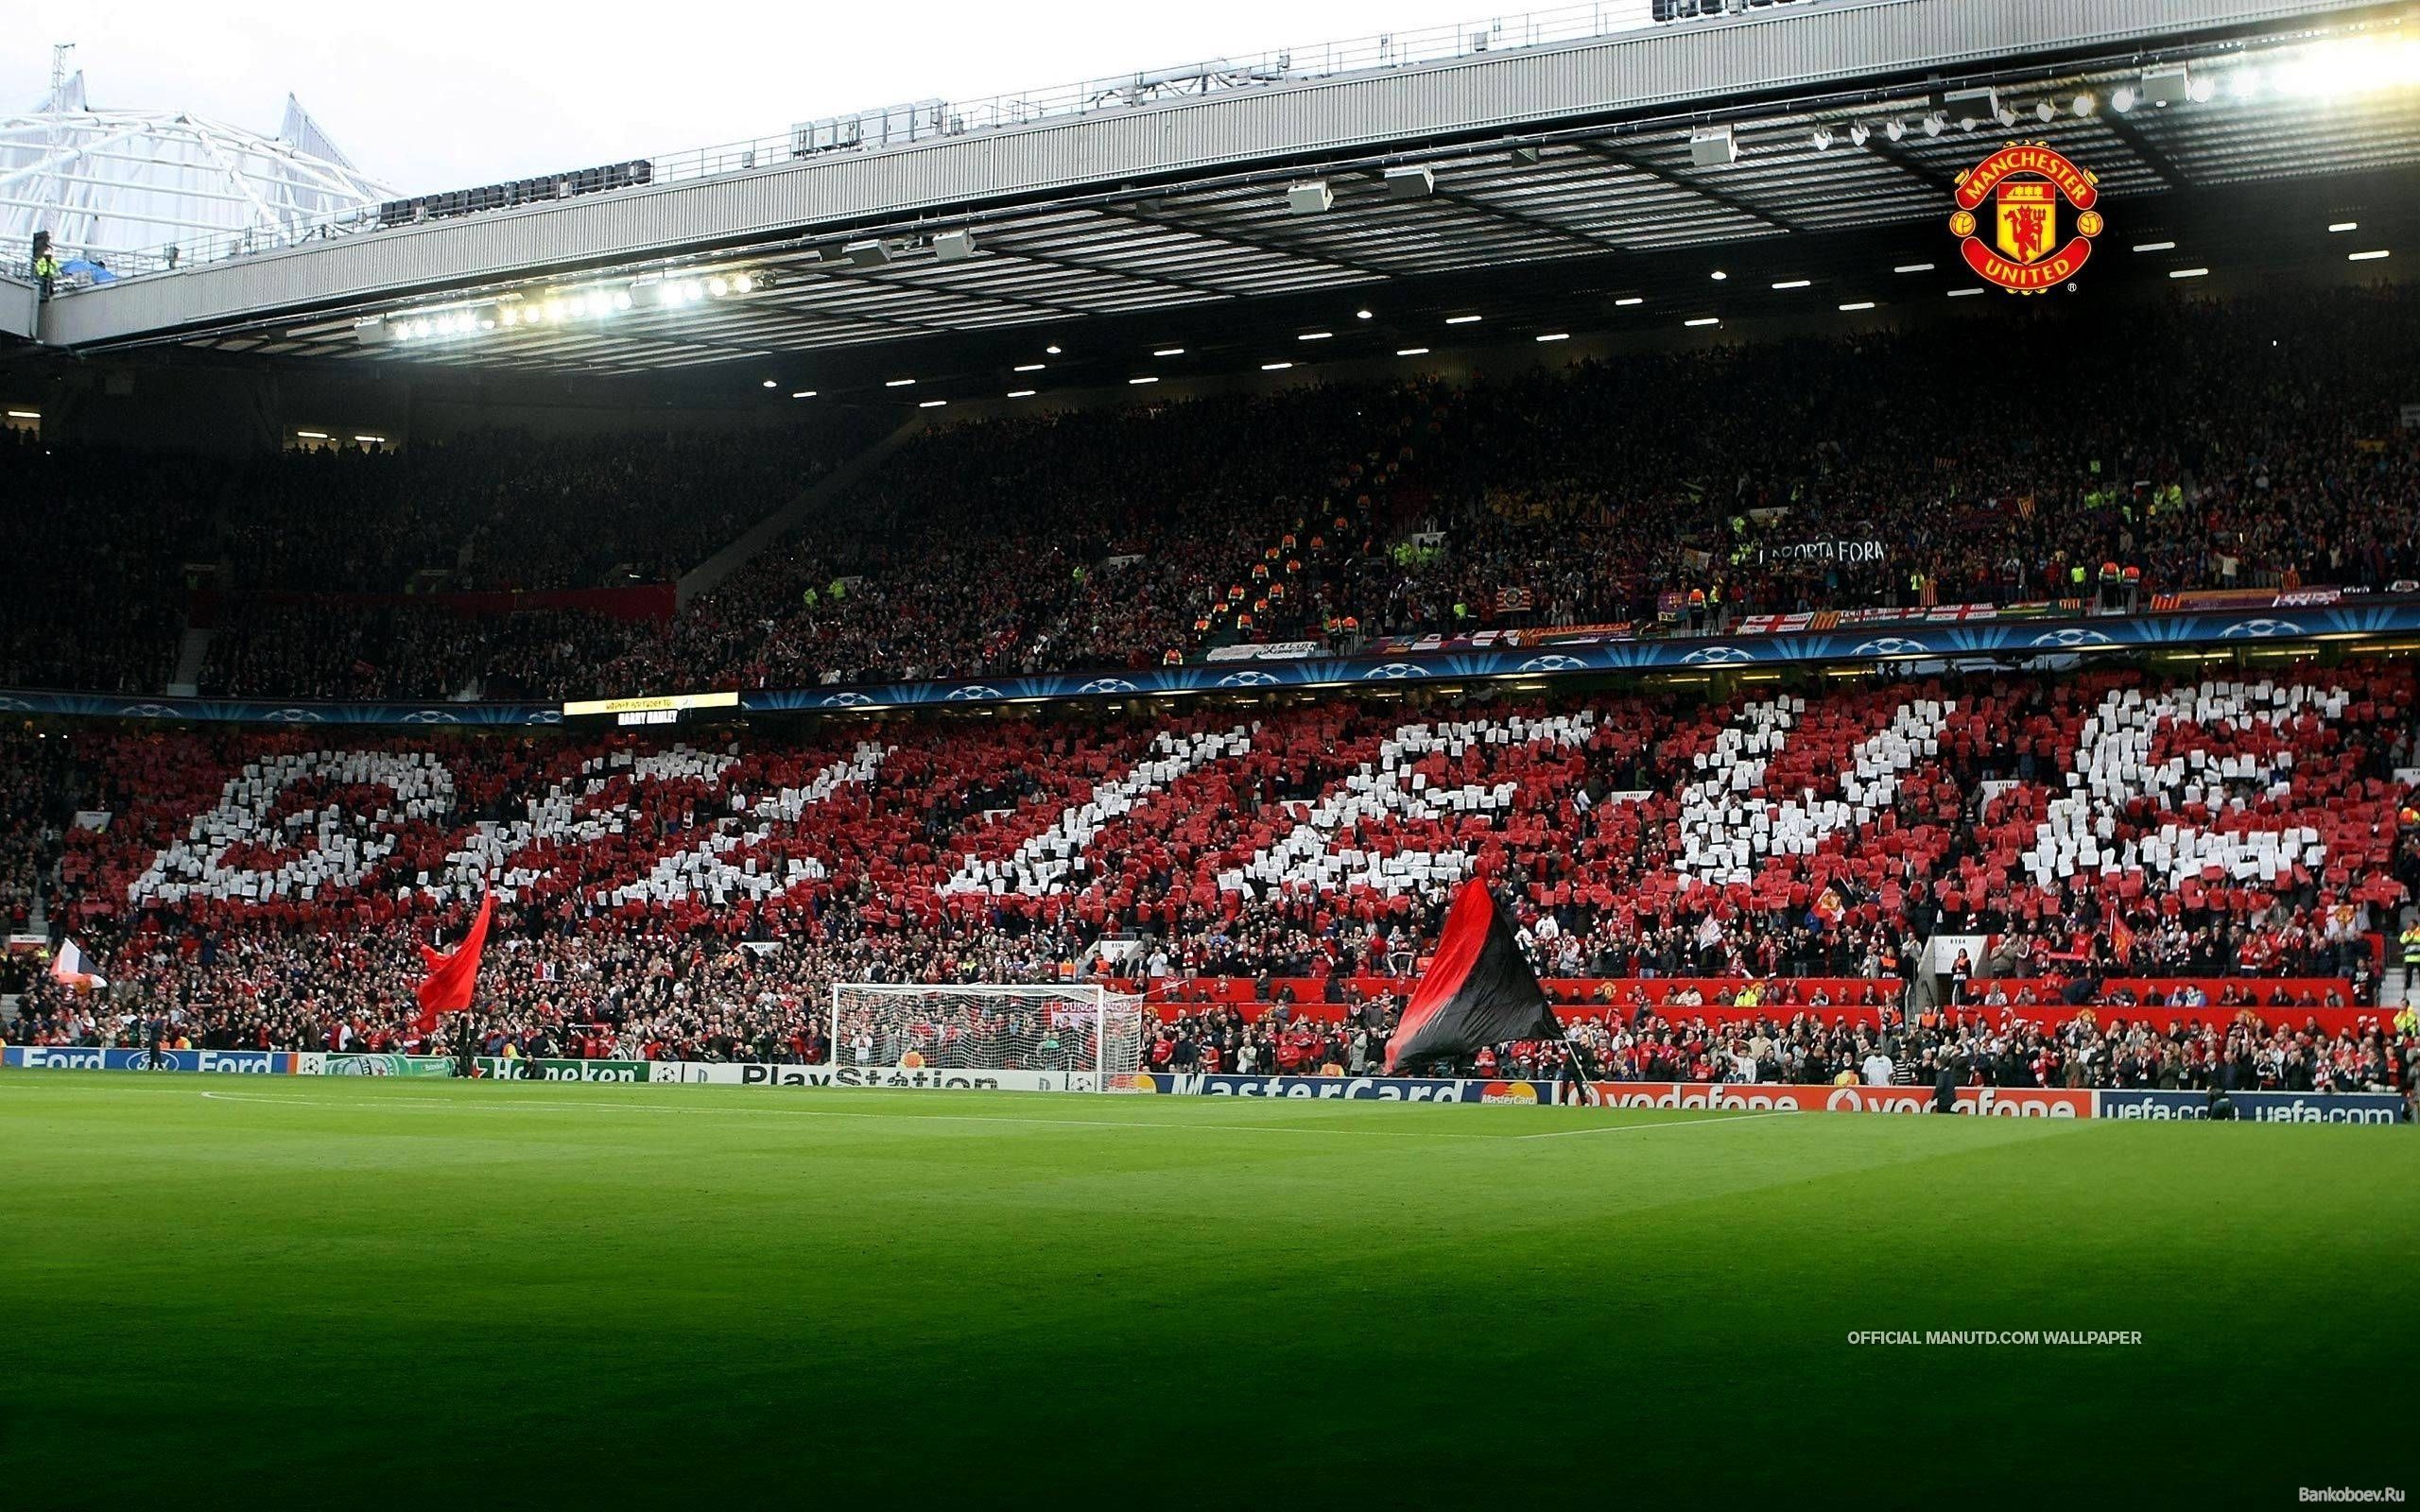 Most Popular Old Trafford Wallpaper HD FULL HD 1080p For PC Background. Manchester united wallpaper, Manchester united fans, Manchester united